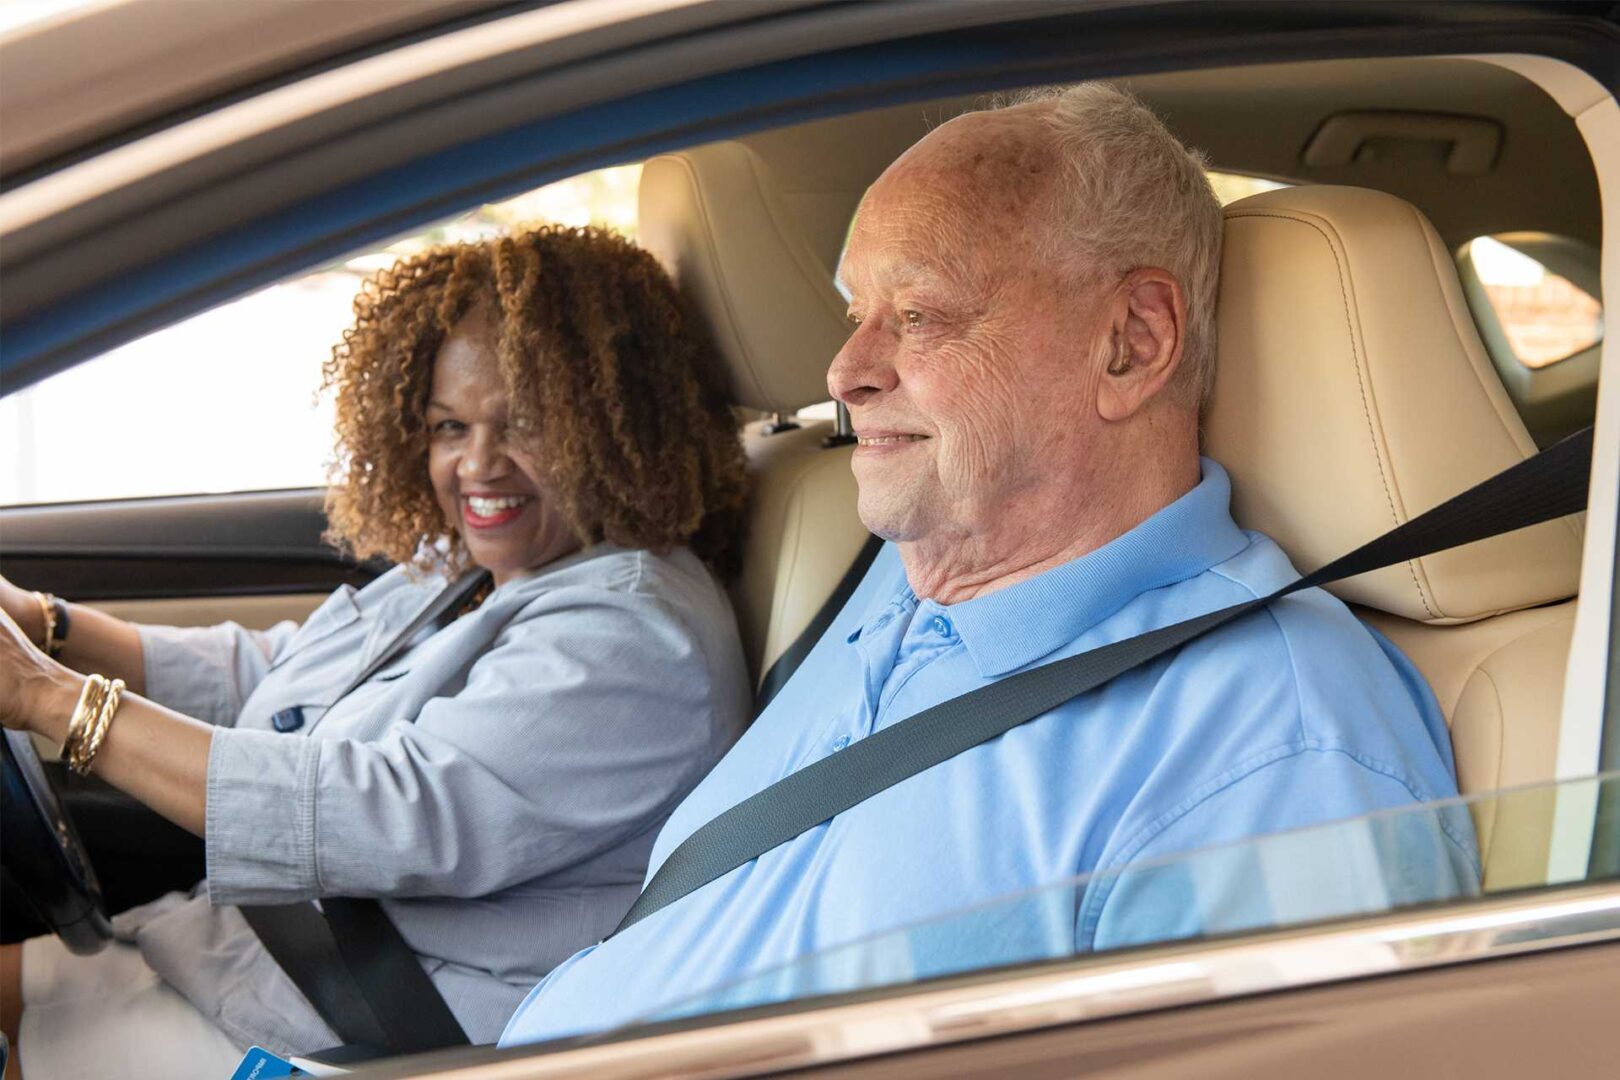 A young woman is the driver of a car with an elderly gentleman in the front passenger seat. Both are smiling because transportation for seniors is now solved!